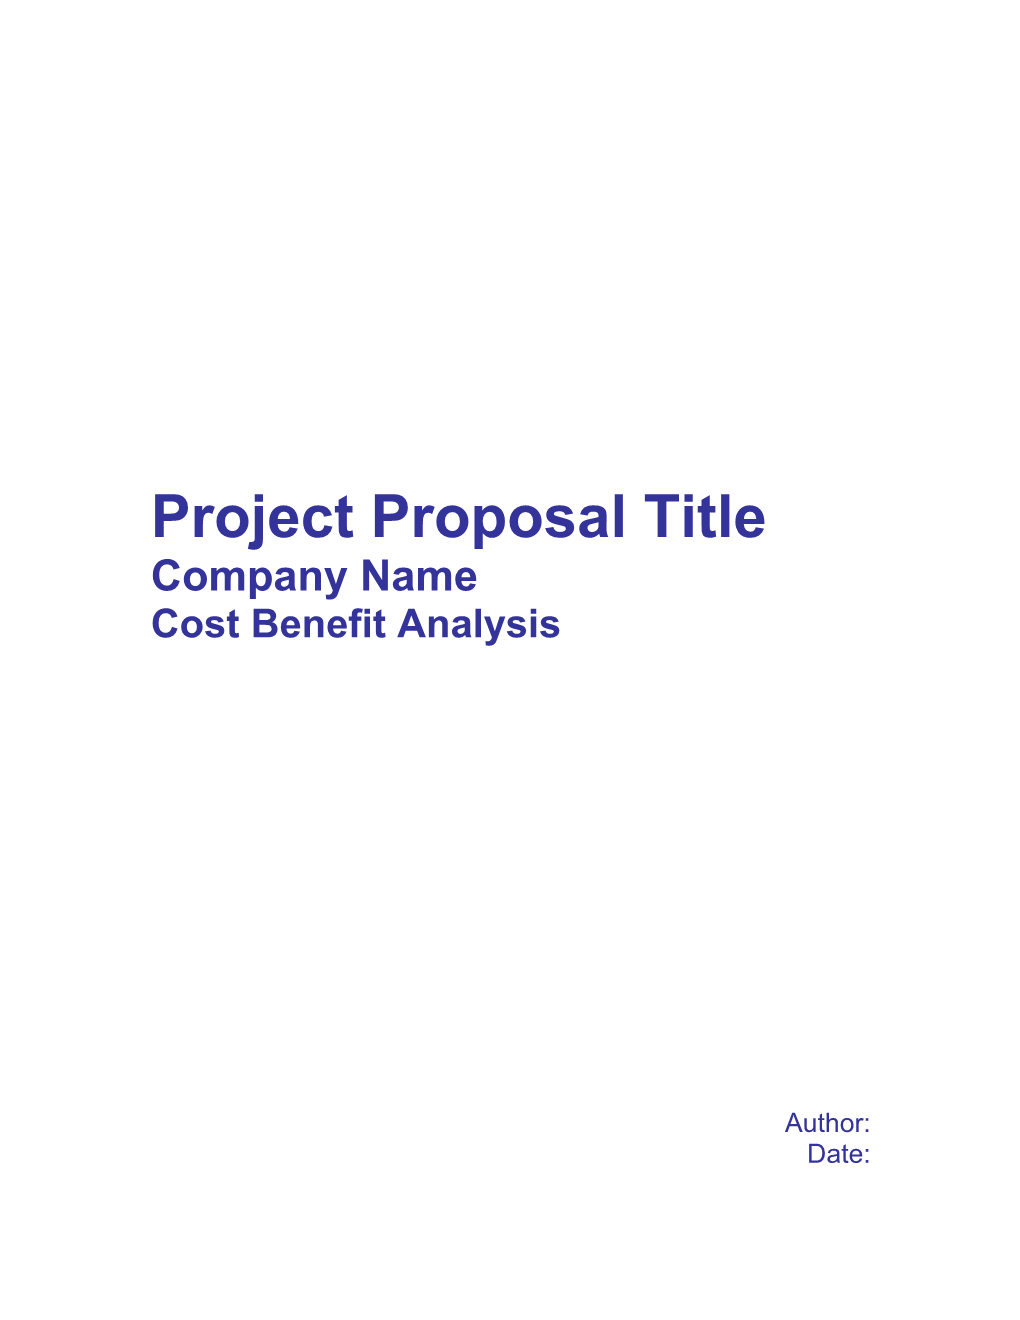 Project Proposal Title